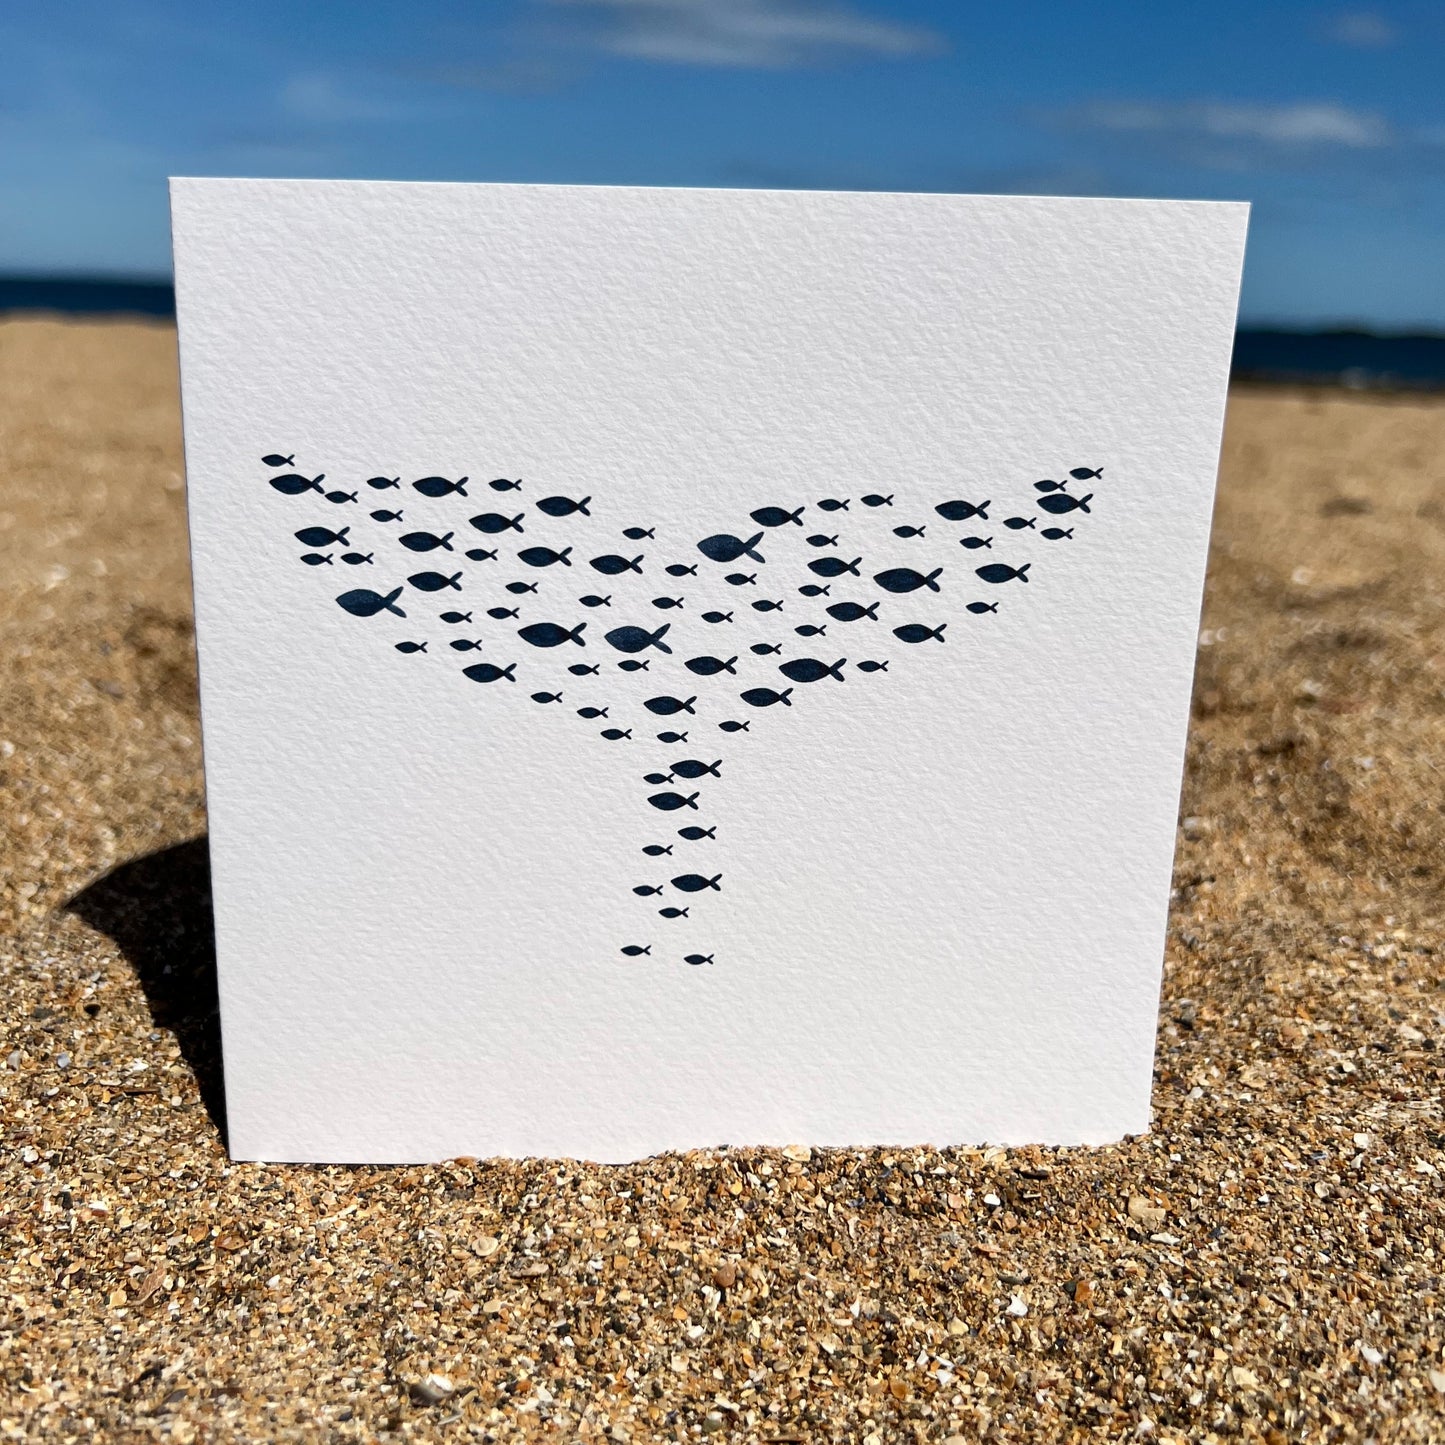 whale's tale art print greetings card, tail made up of individual watercolour fish.